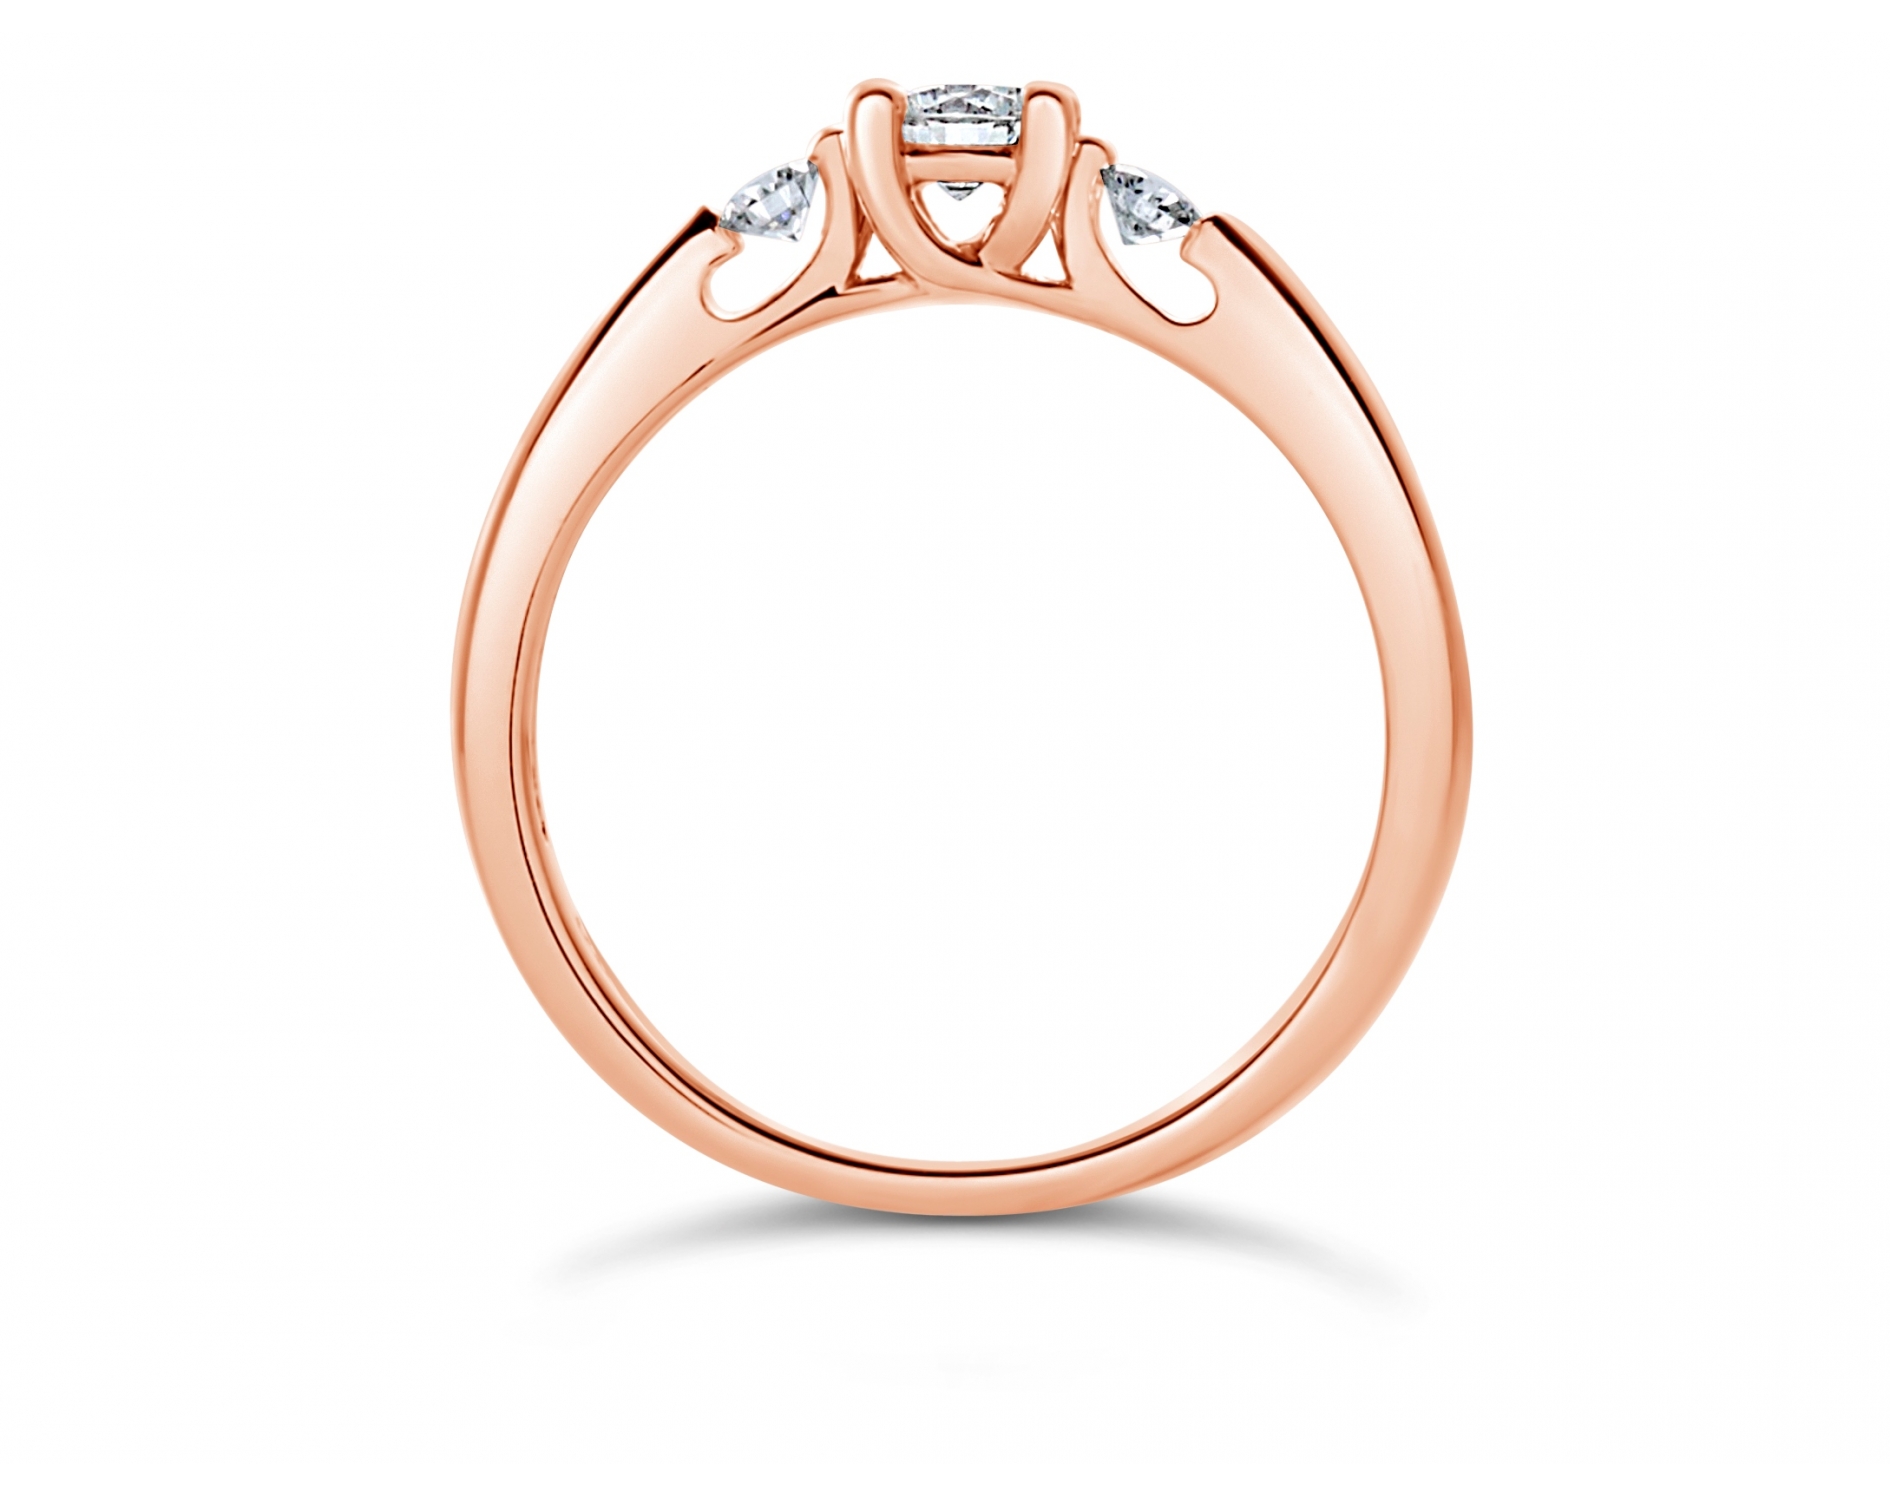 18k rose gold 4 prong open gallery three stone engagement ring Photos & images